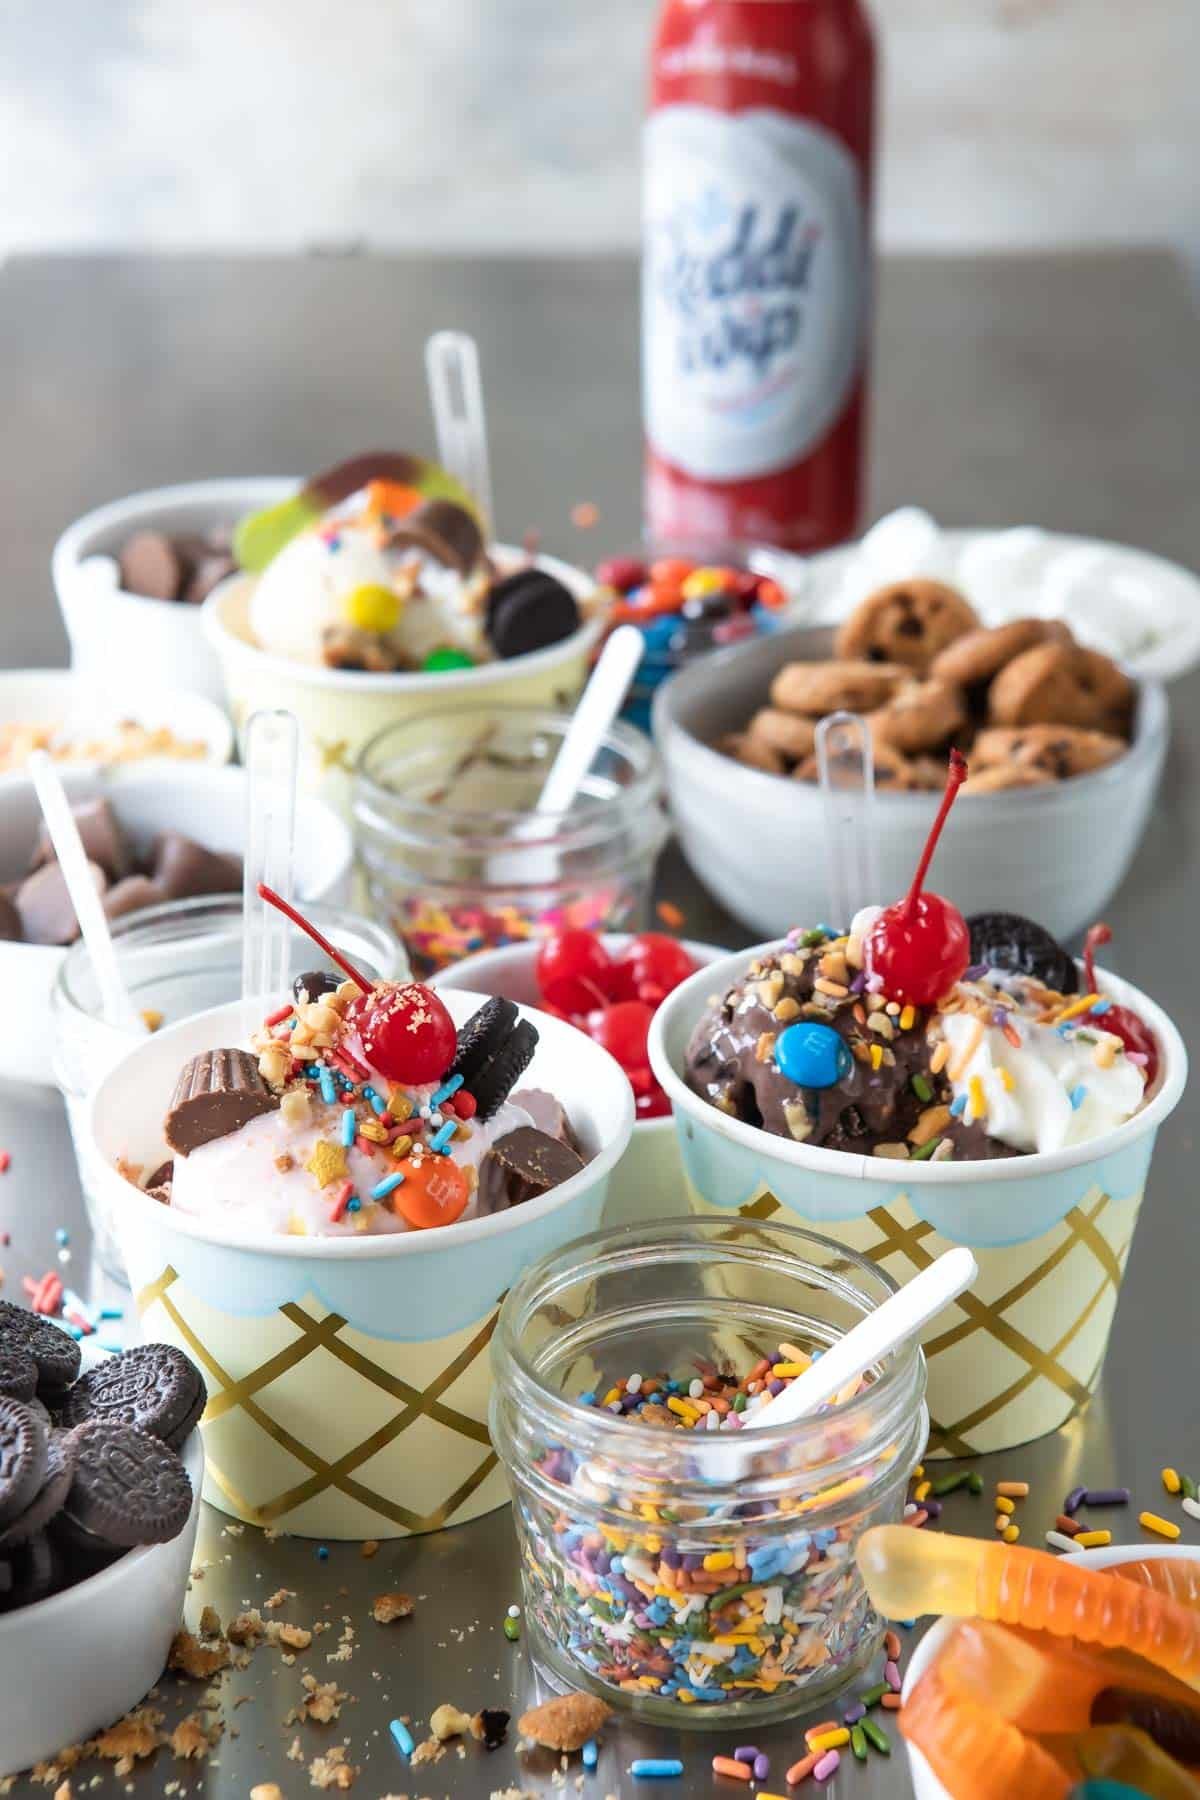 Two ice cream sundaes surrounded by various ice cream toppings.